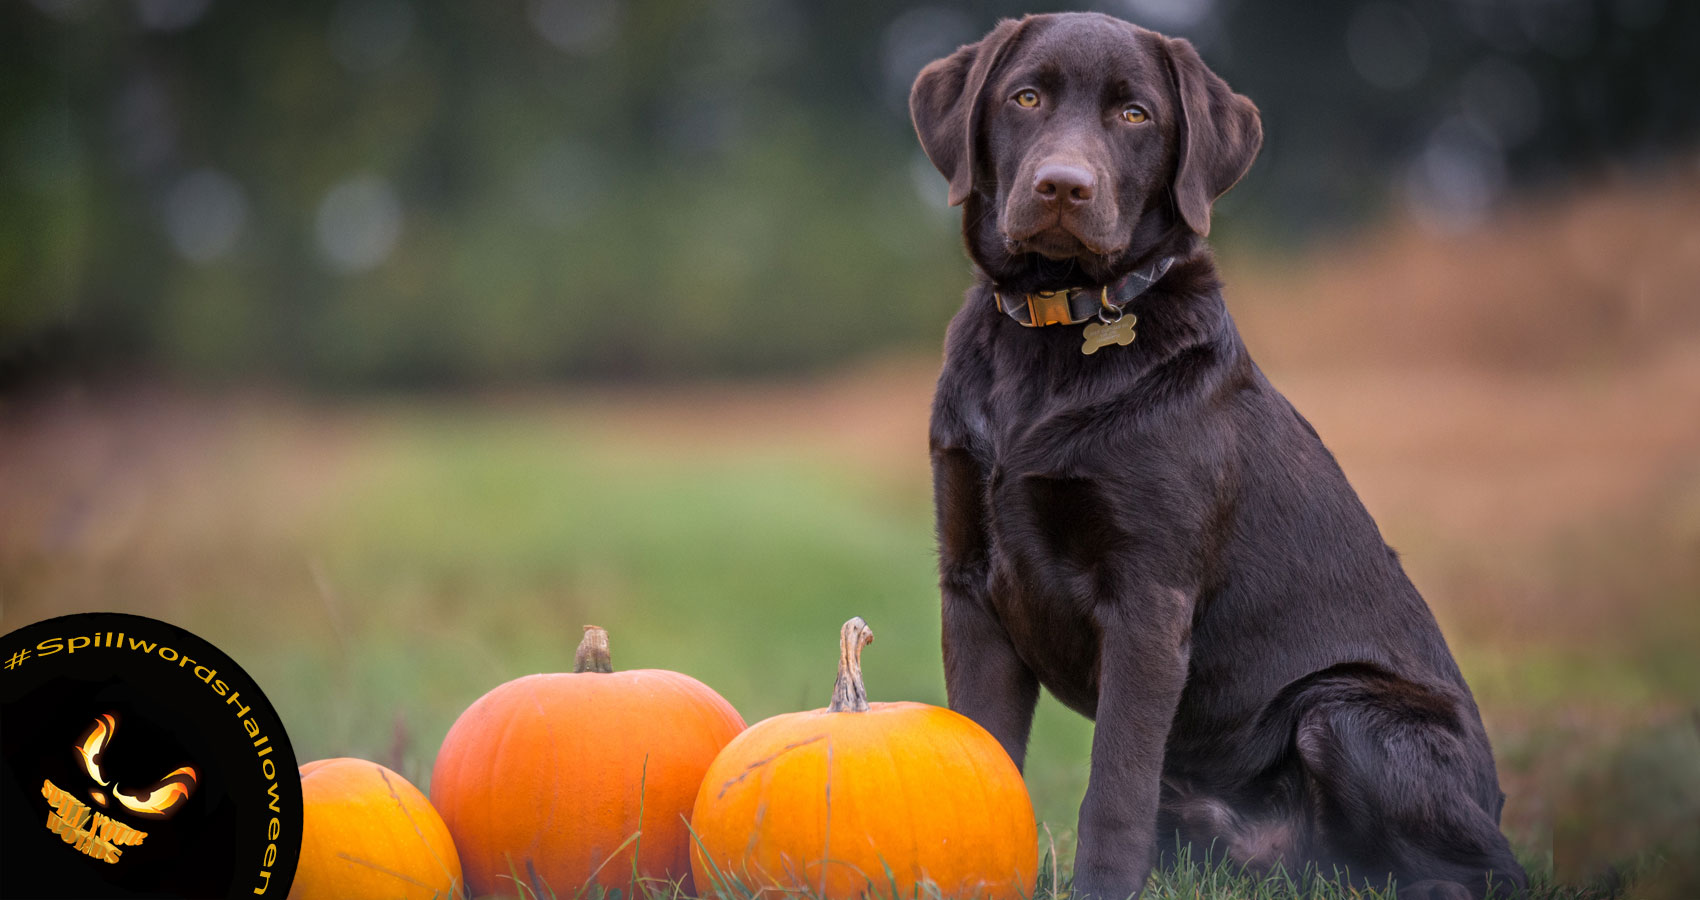 Dog's Take on Halloween, poetry written by N. K. Hasen at Spillwords.com